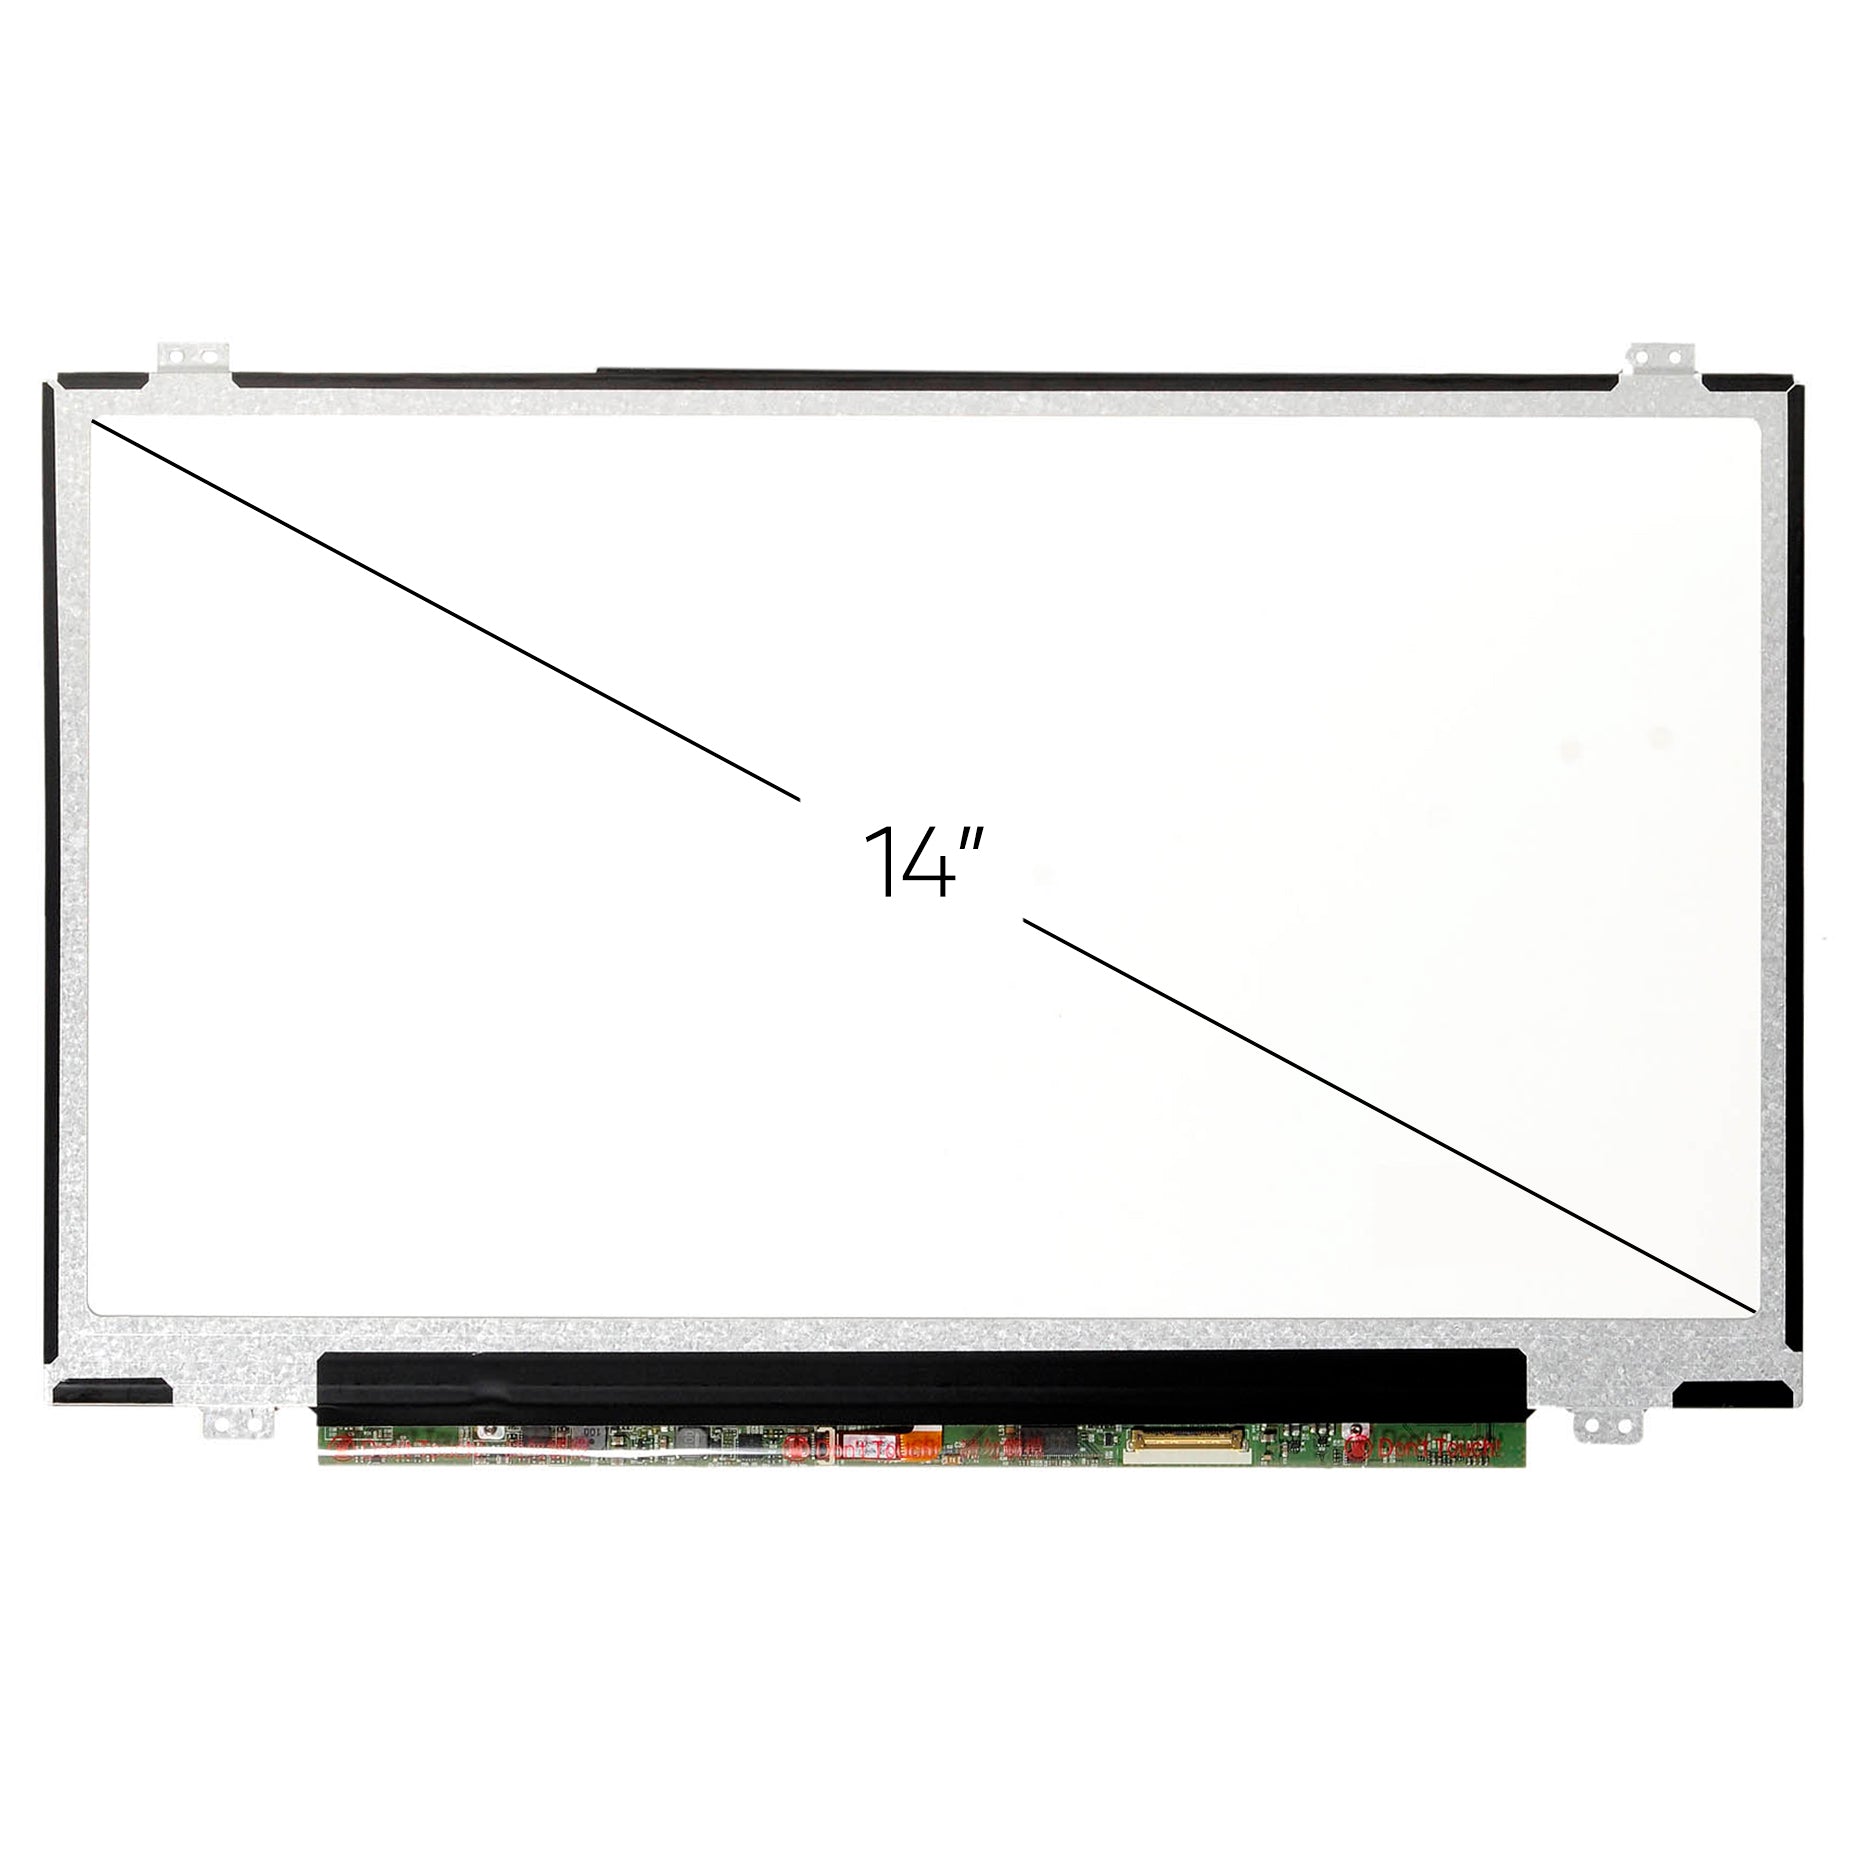 Screen Replacement for ASUS Zenbook UX430UN FHD 1920x1080 IPS Matte LCD LED Display